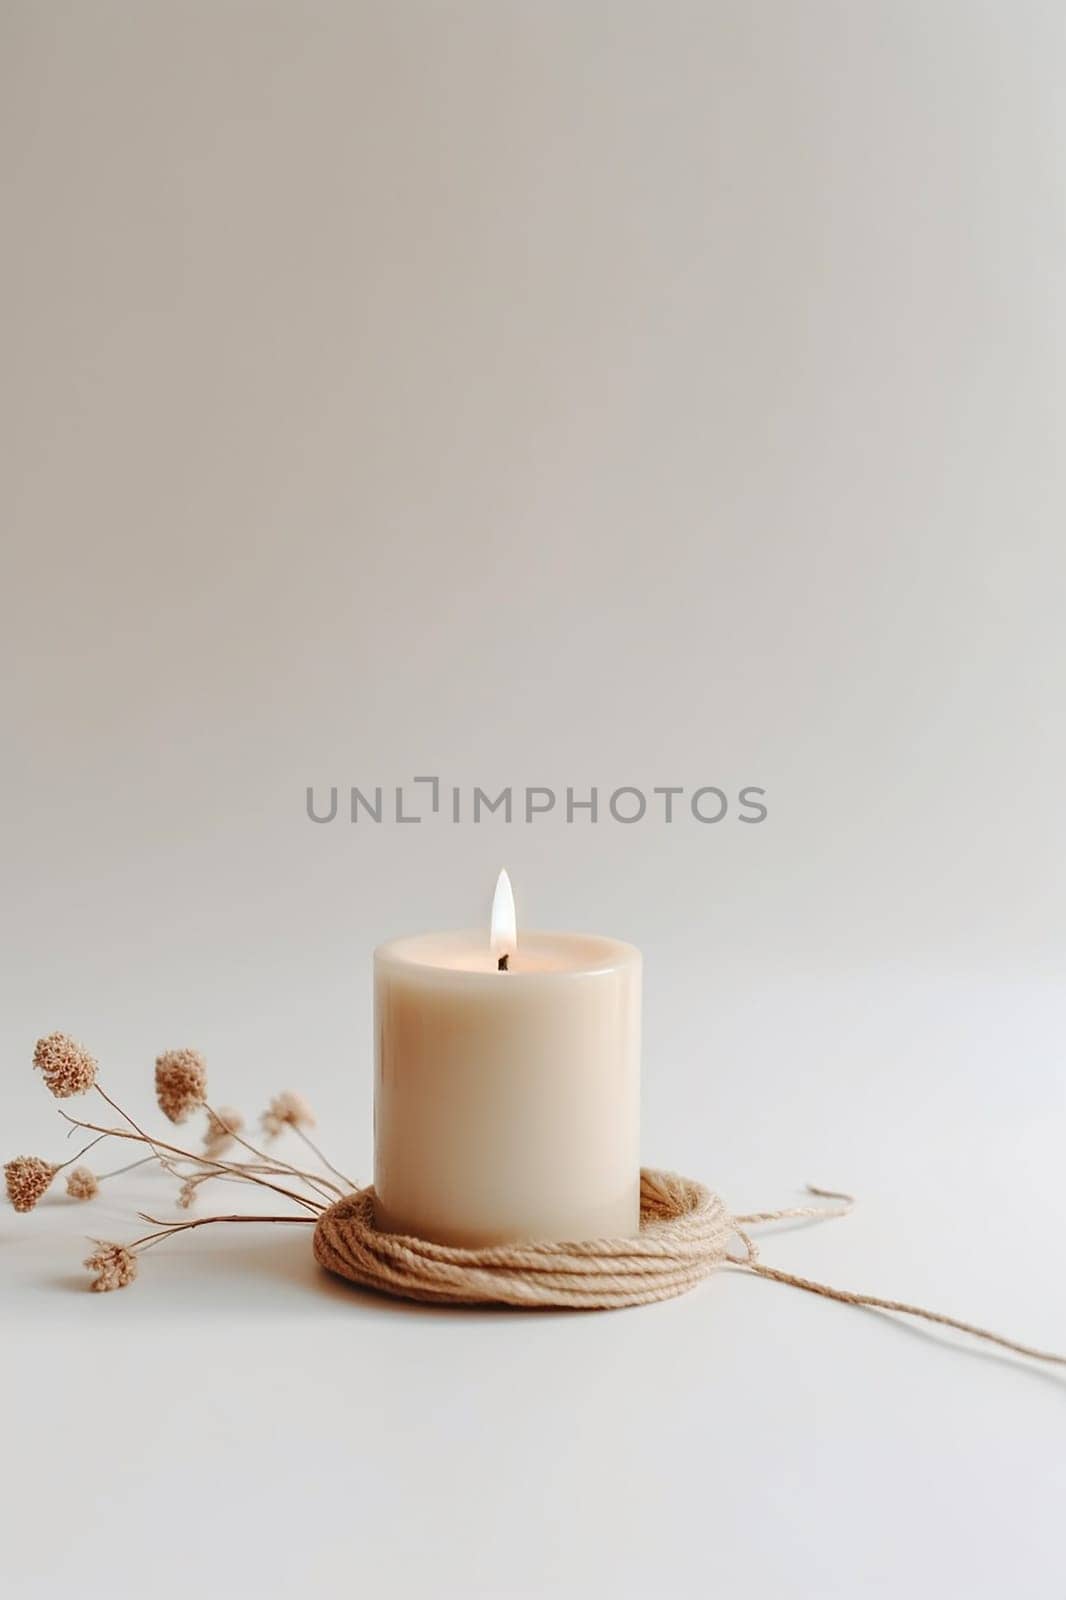 A lit candle on a coiled rope with dried flowers against a neutral background.